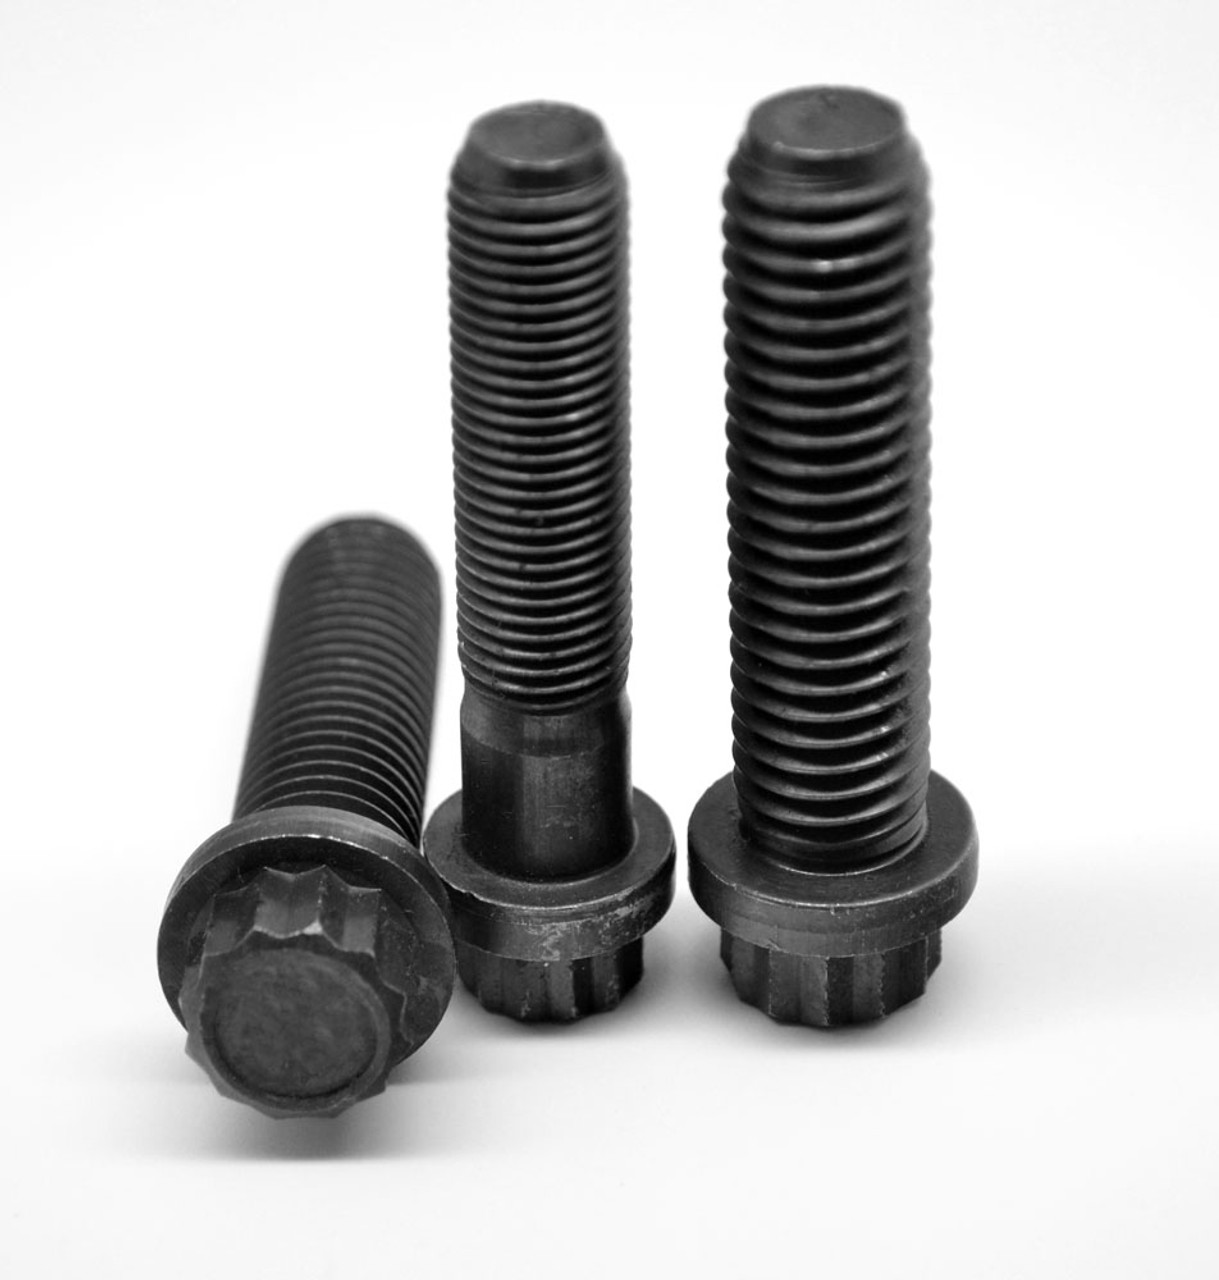 1/4-20 x 1 Coarse Thread 12-Point Flange Screw Alloy Steel Thermal Black Oxide